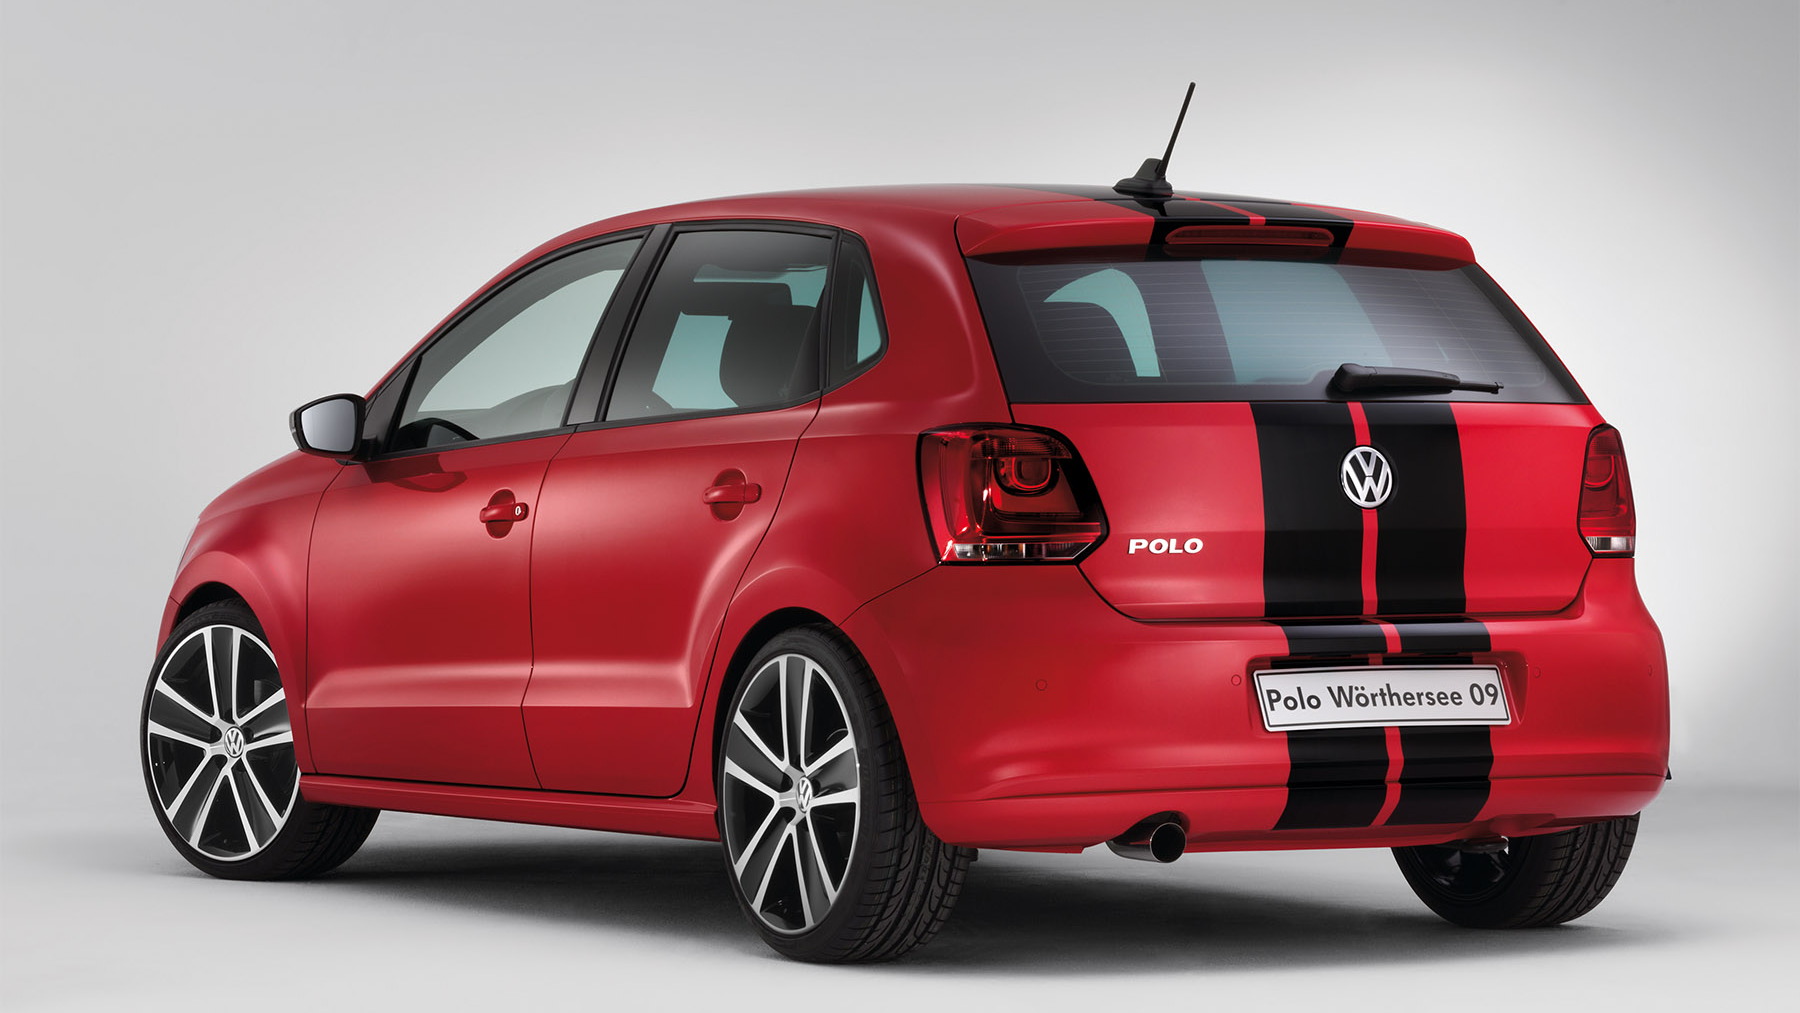 2009 volkswagen wörthersee 09 polo gti concept 002